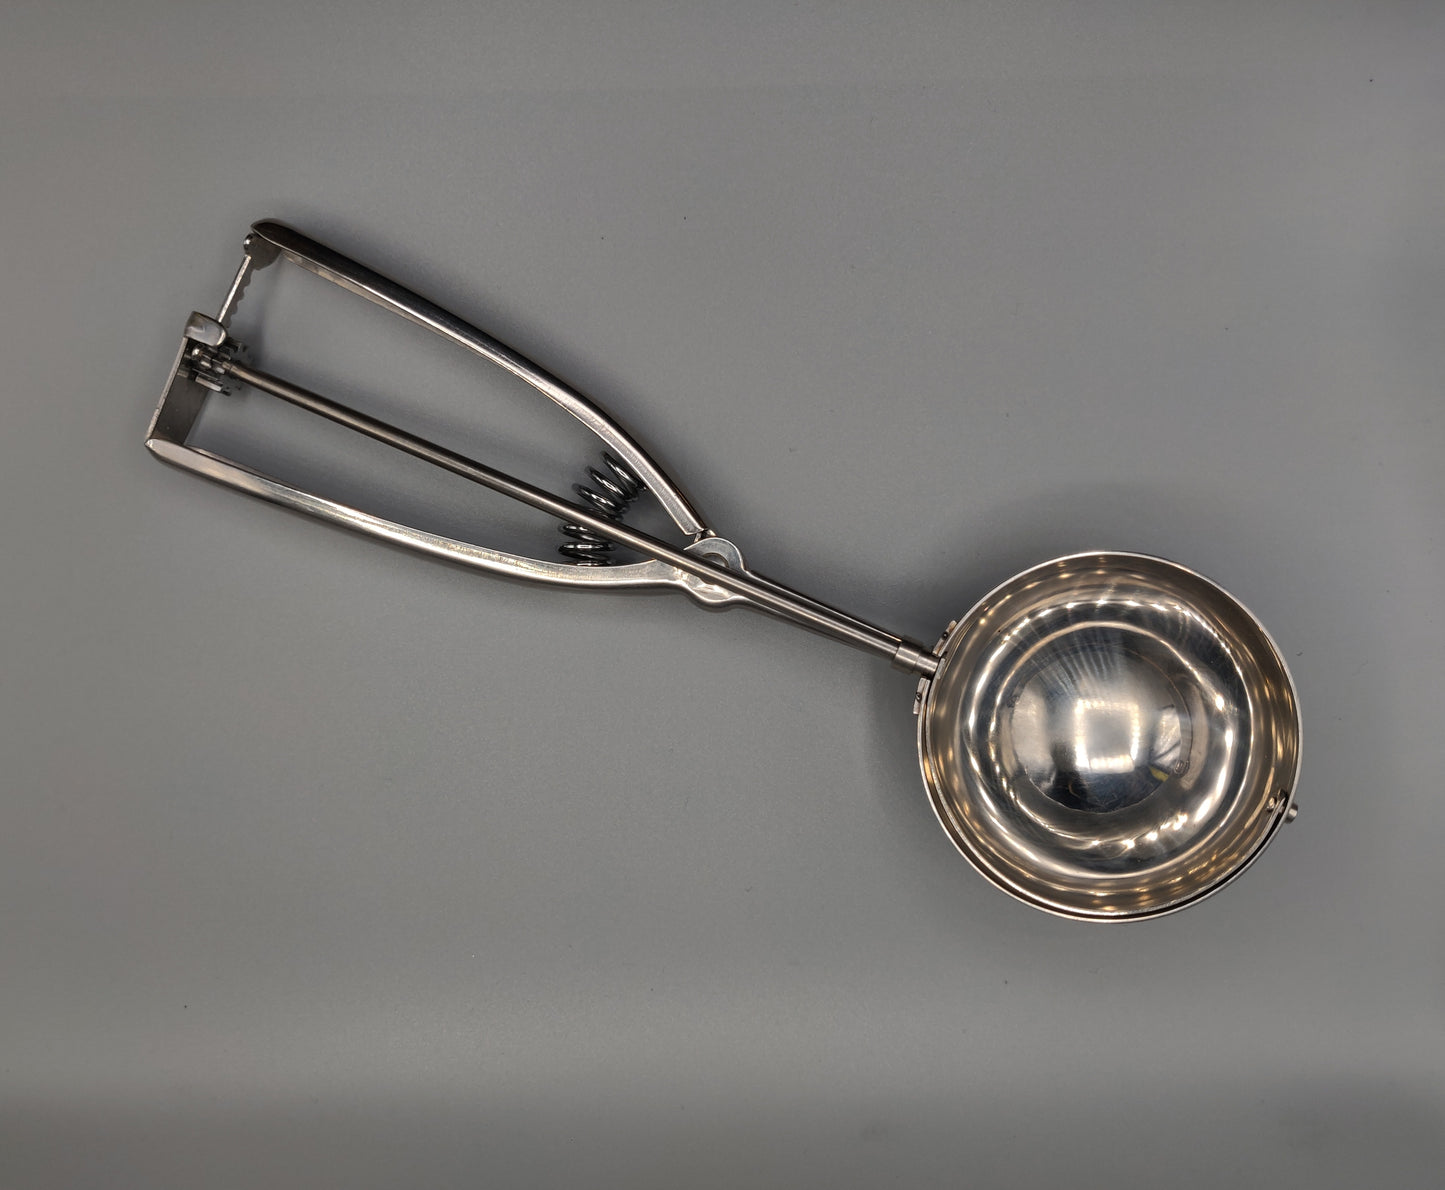 2.67 oz All Metal Disher / Cookie and Ice Cream Scoop